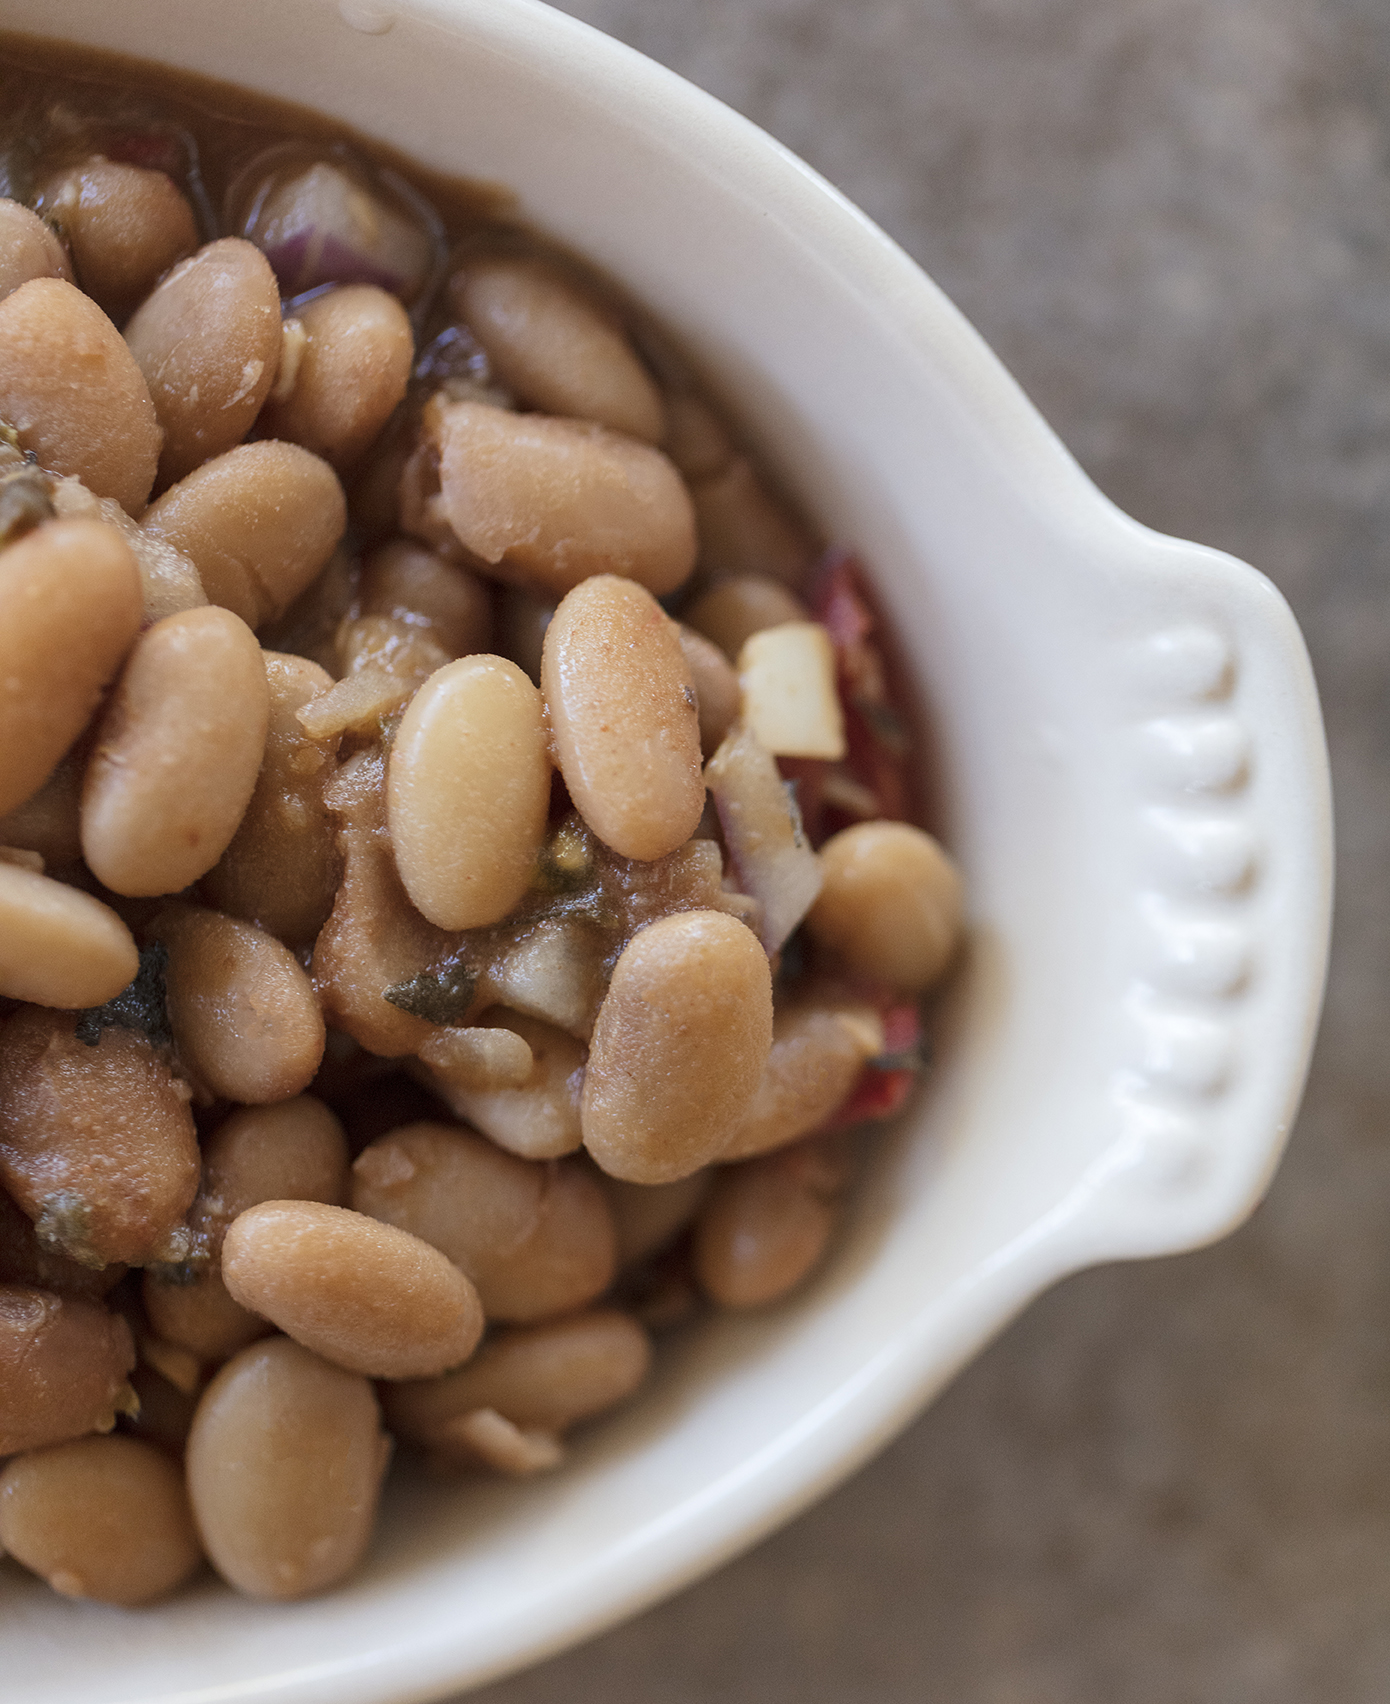 charro cowboy beans in a white side dish. Recipe photo from The Taste of Tucson Cookbook by Jackie Alpers